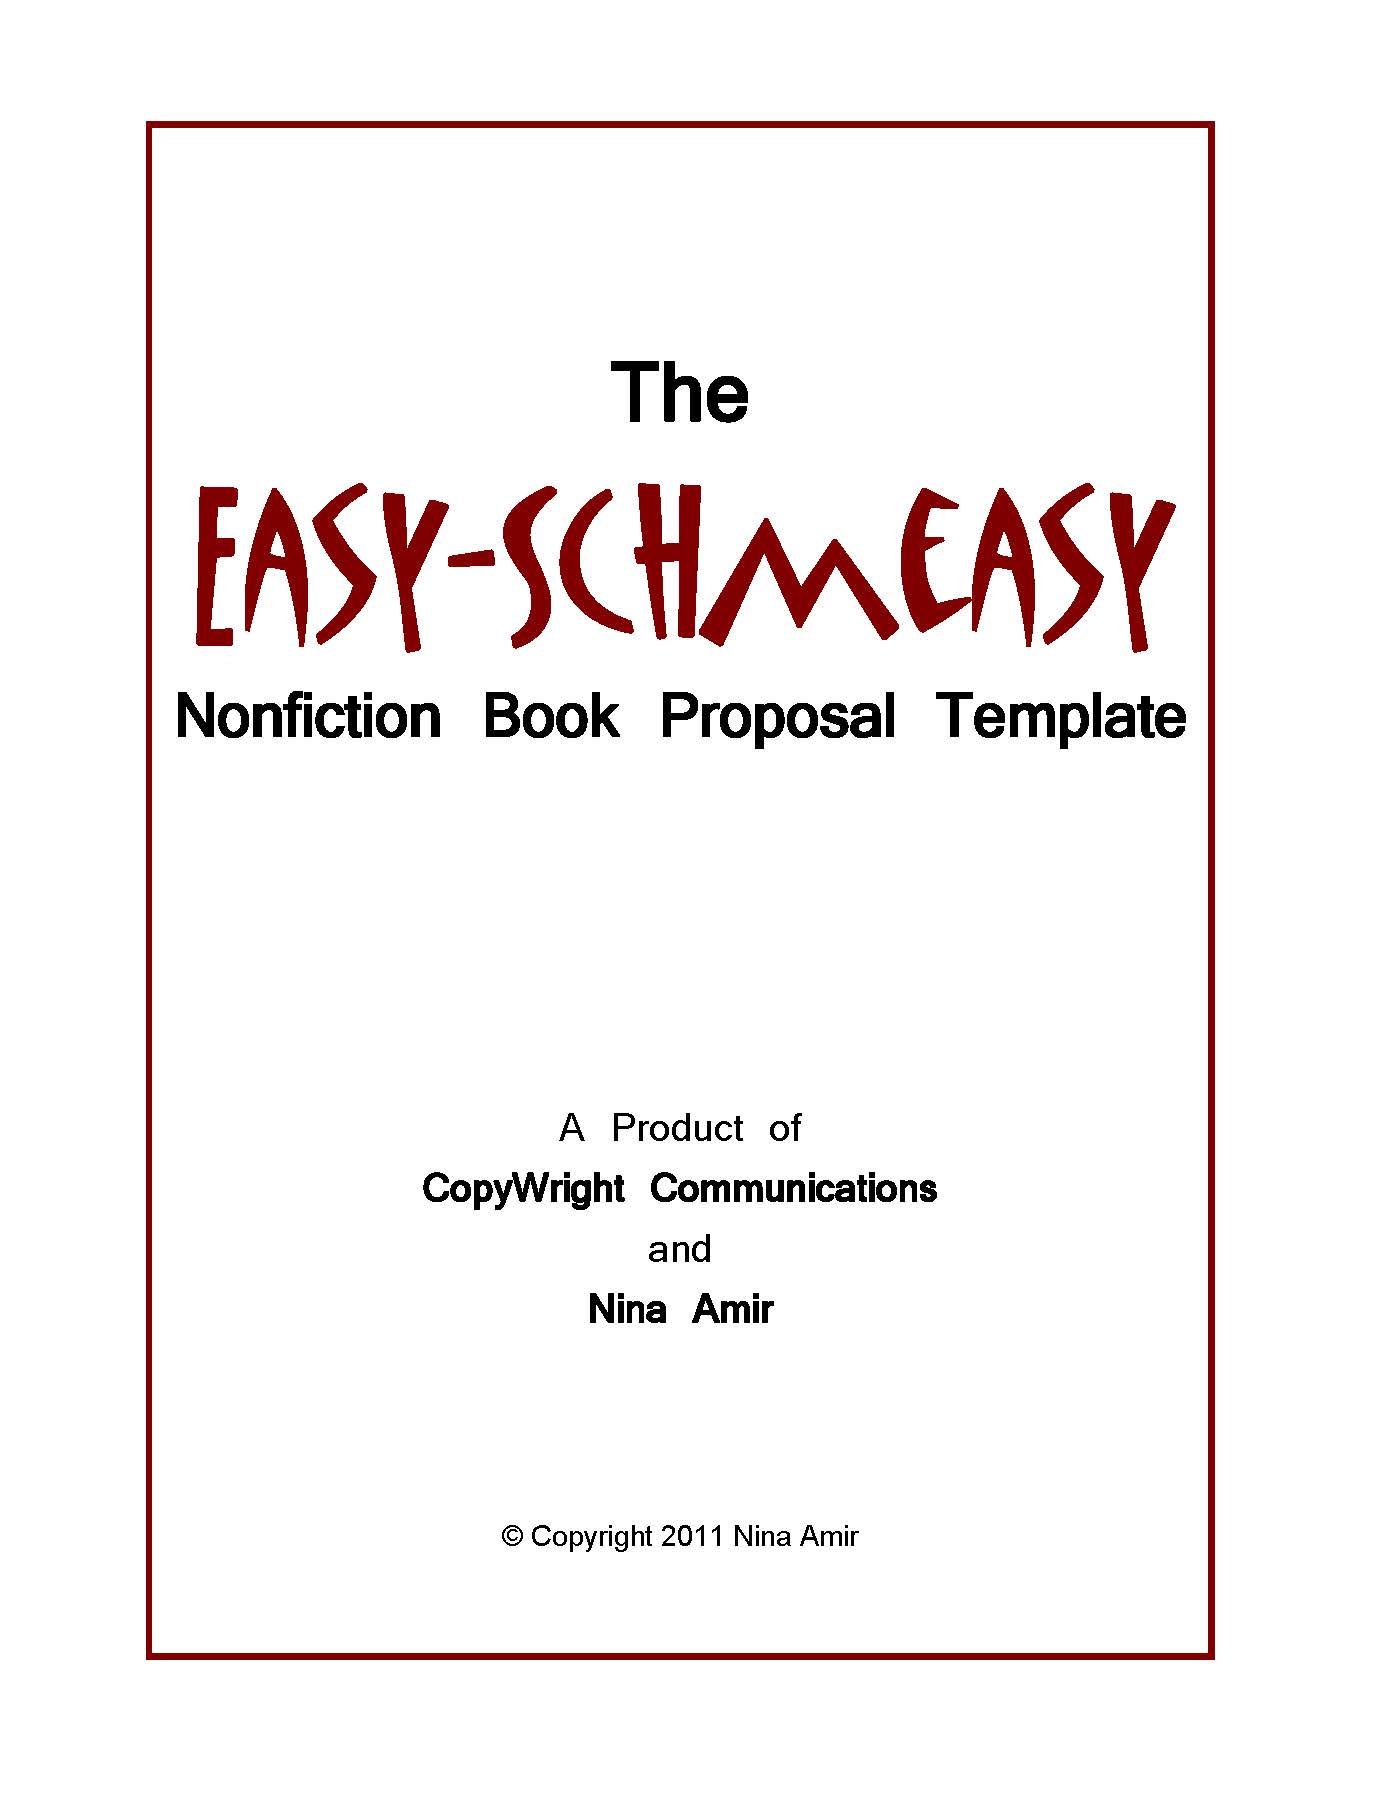 Easy Schmeasy Book Proposal Template   Write Nonfiction NOW!